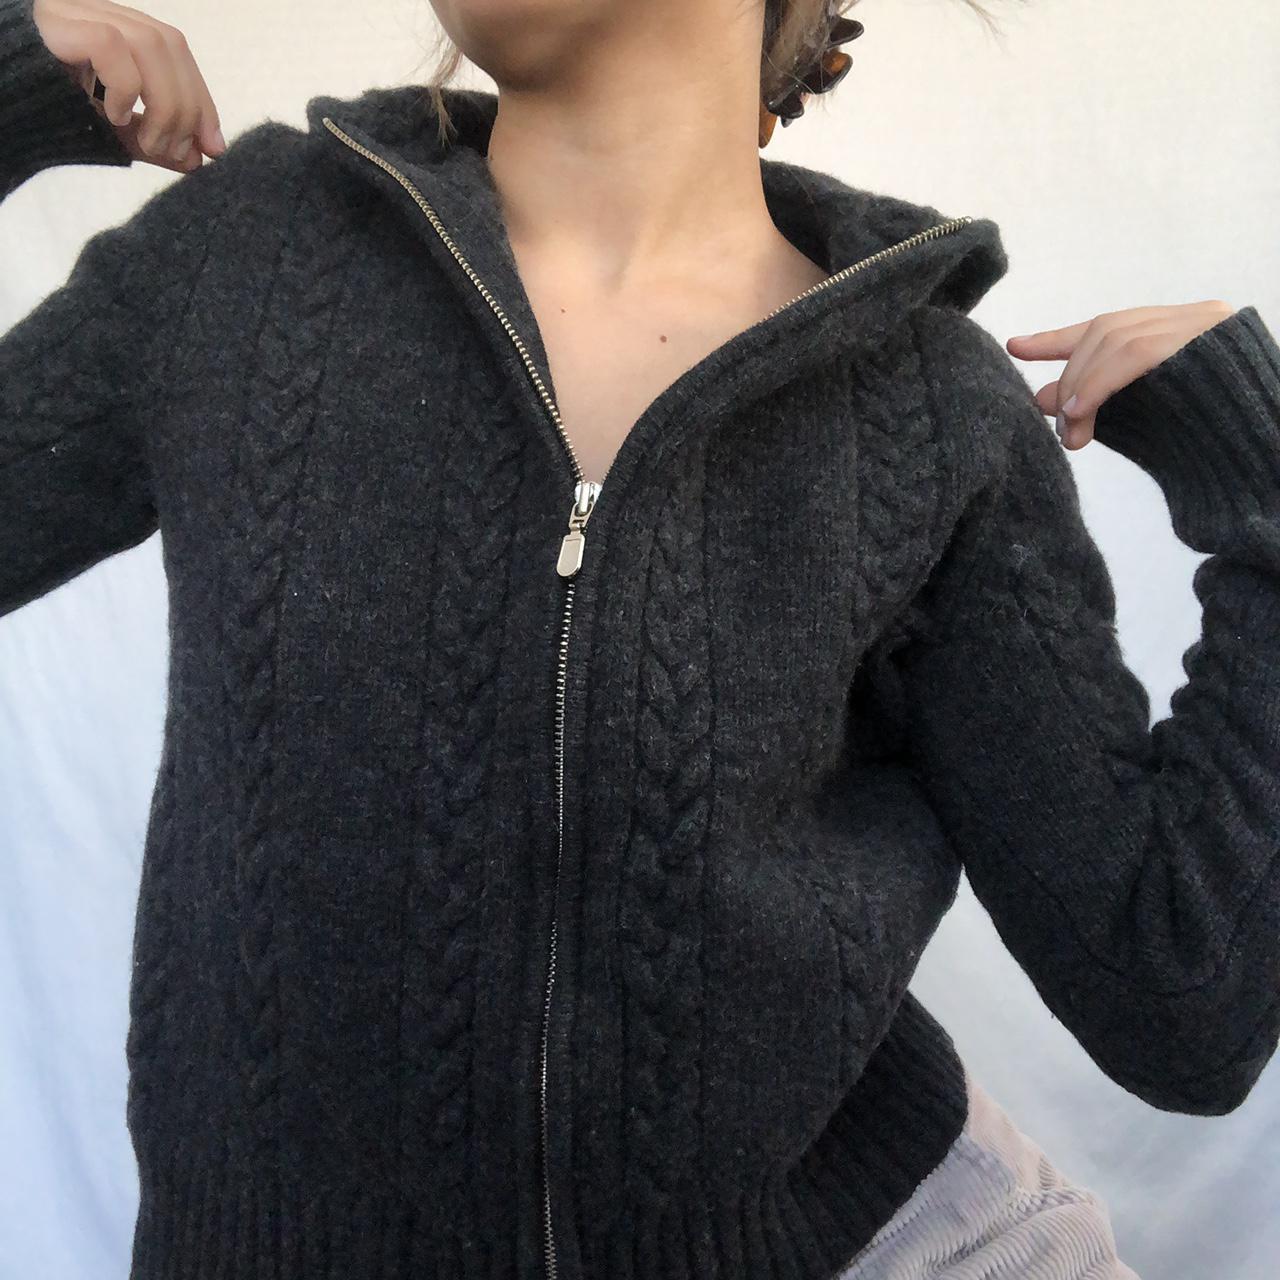 Product Image 2 - Dark grey cable knit zip